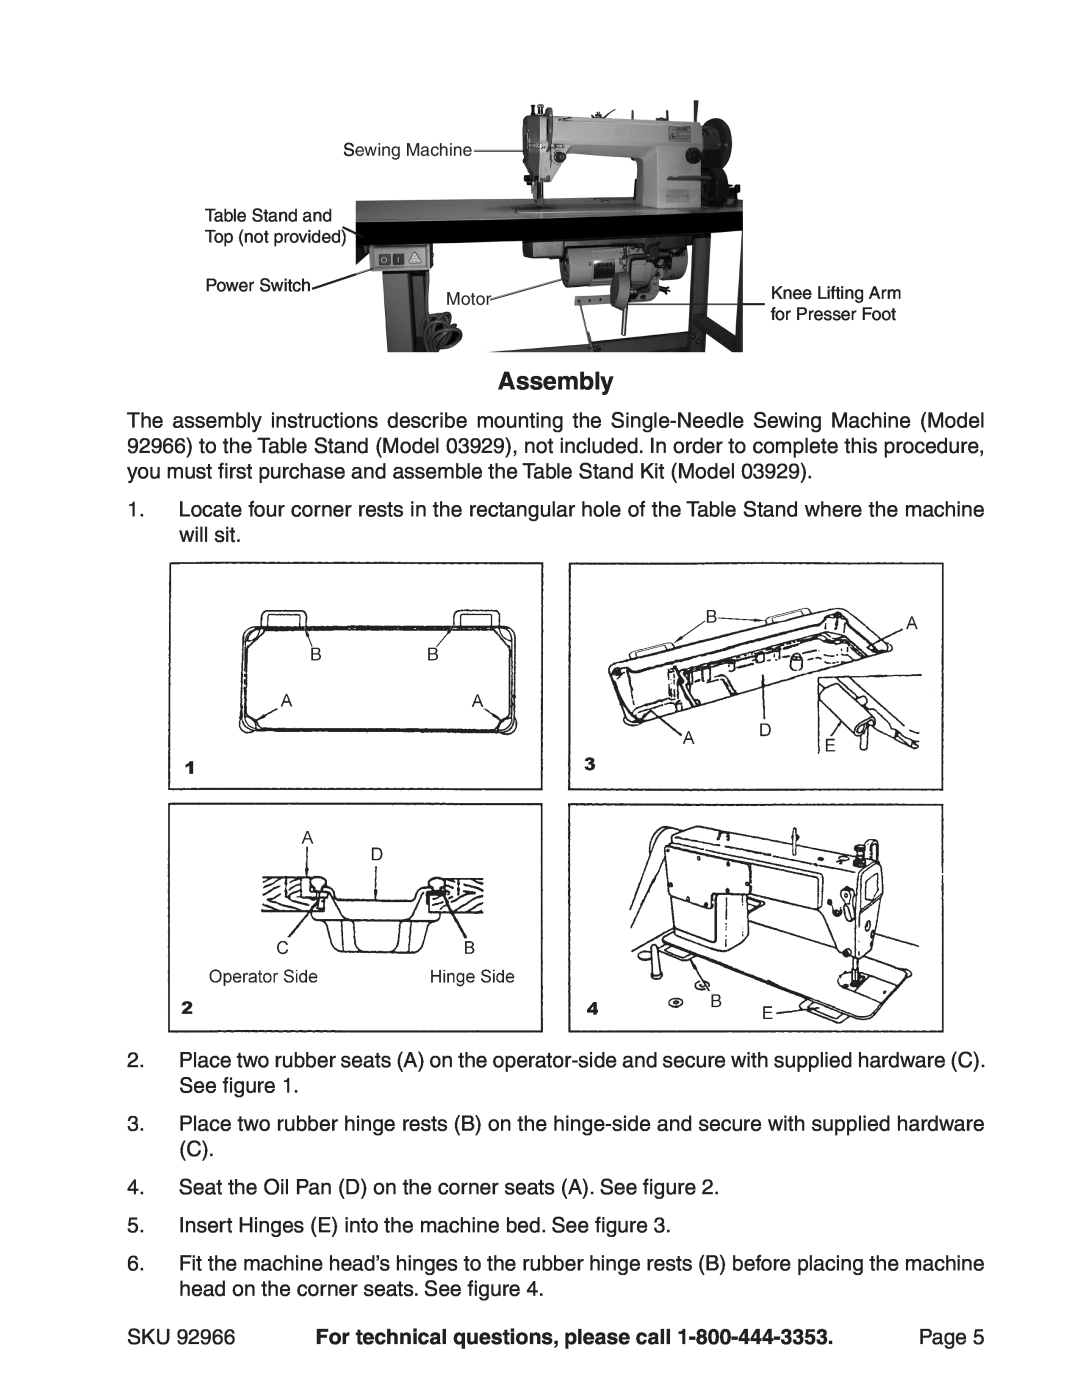 Harbor Freight Tools 92966 manual Assembly, For technical questions, please call 